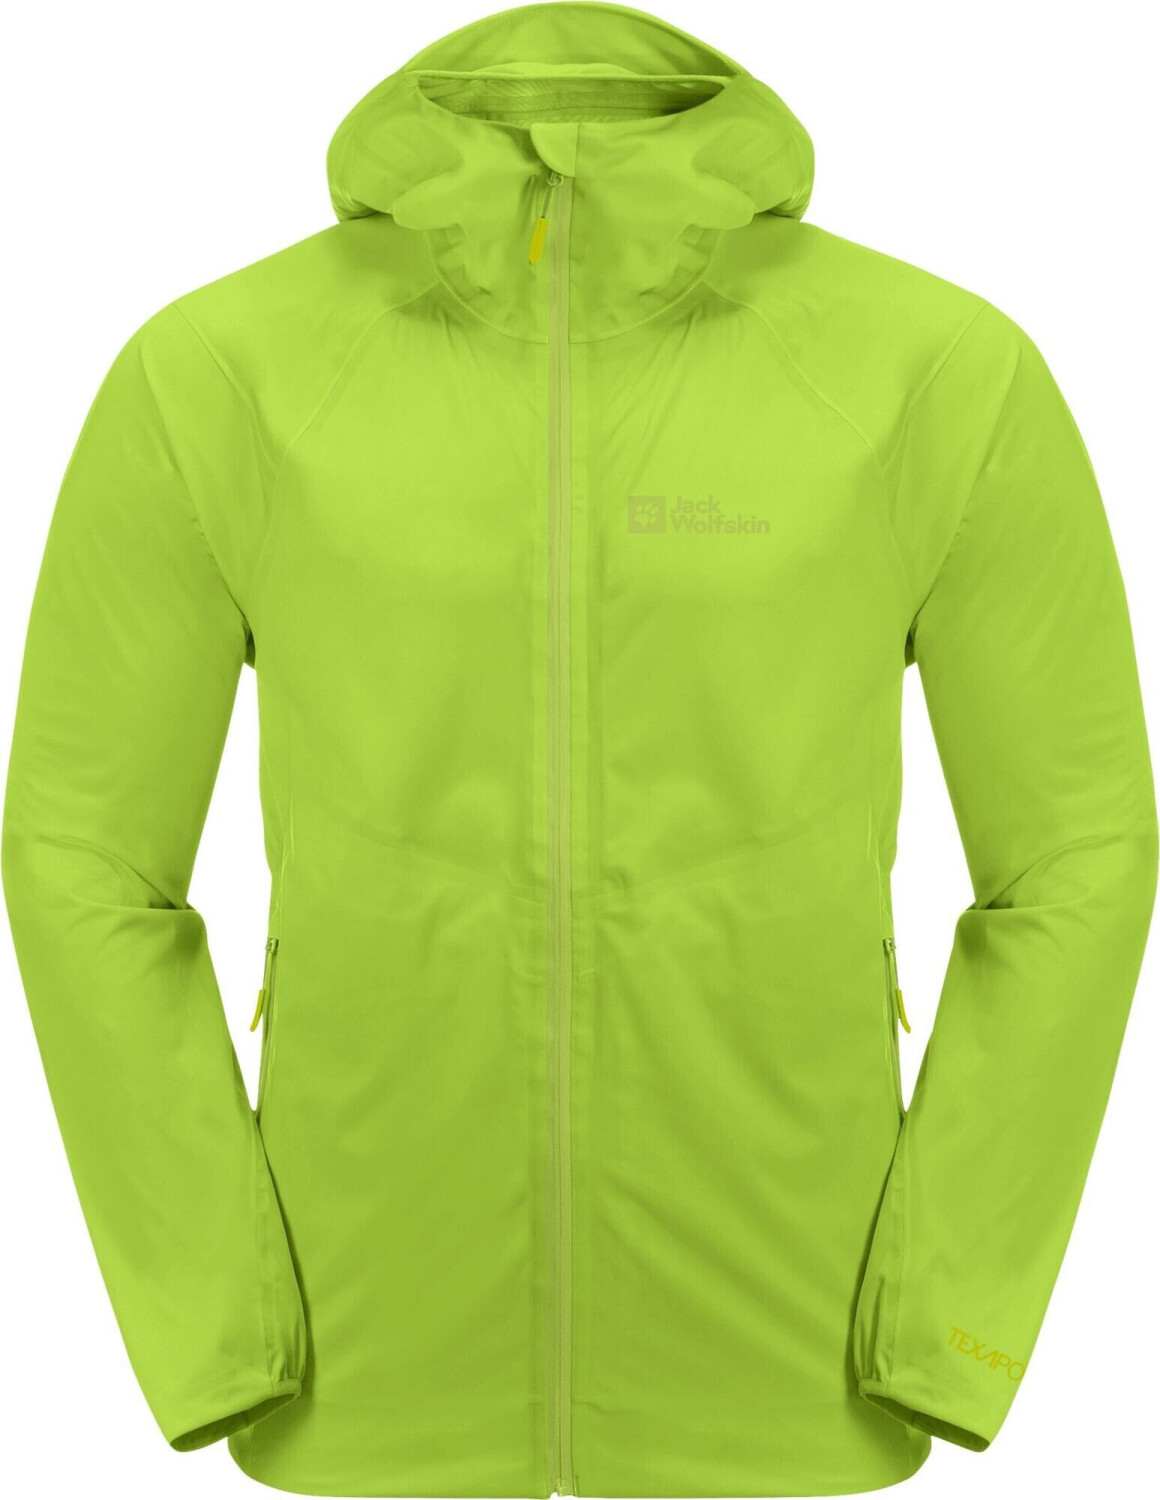 Jack Wolfskin Emberberg 3L Jacket M fresh green - In The Know Cycling